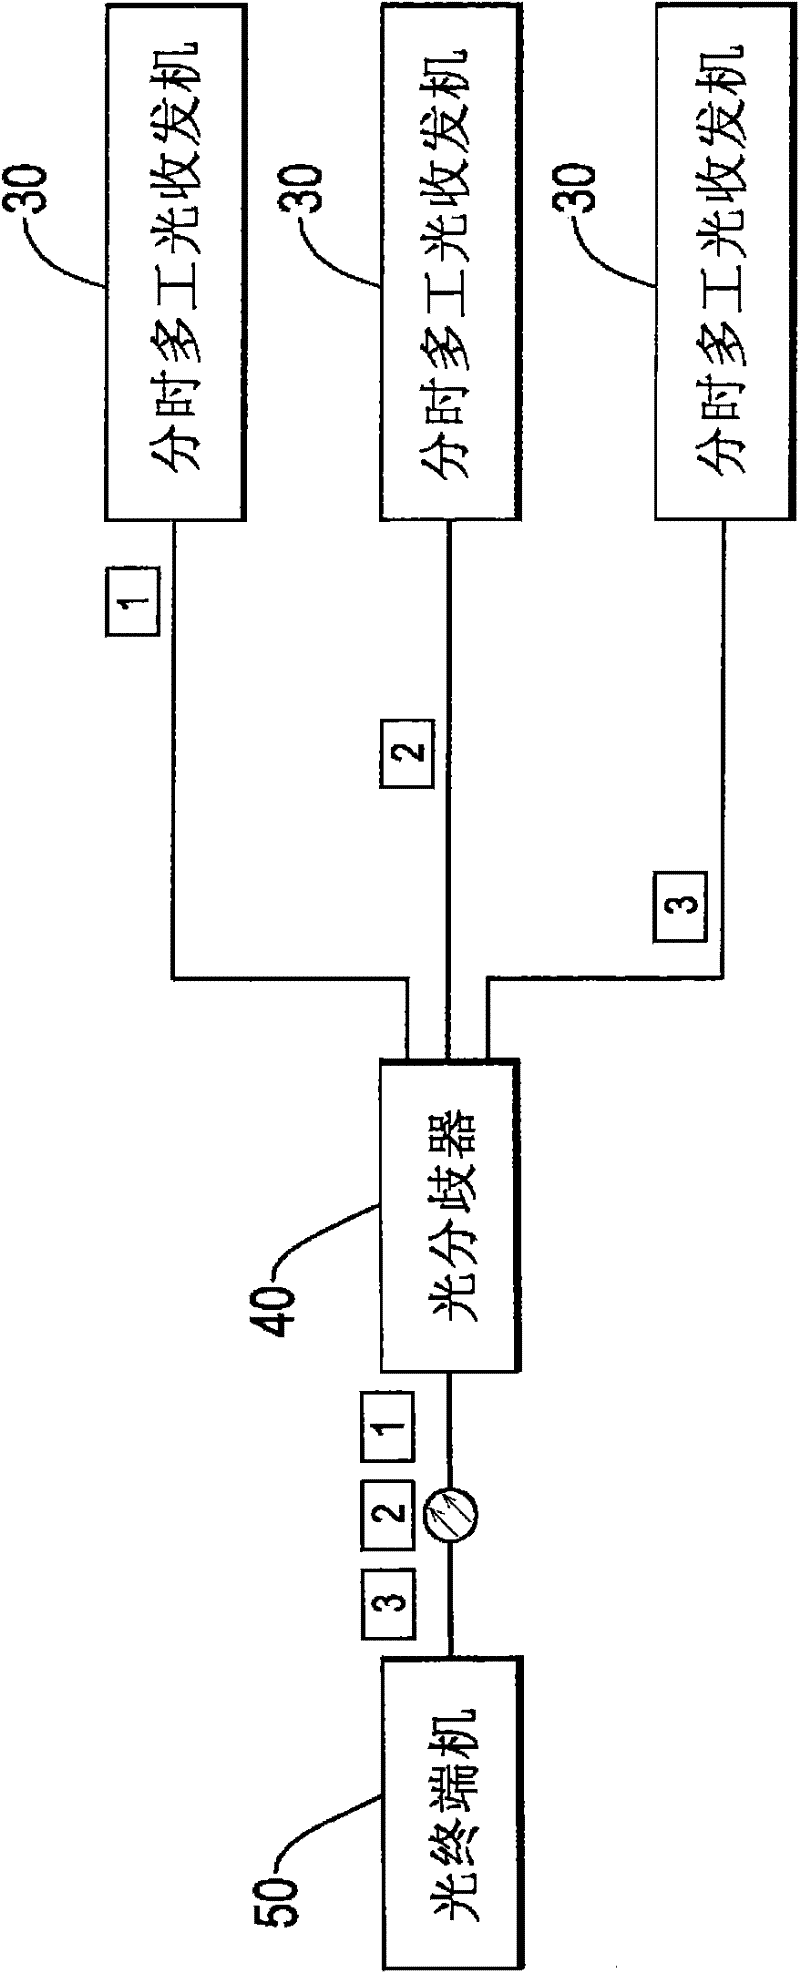 Time-division multiplexing (TDM) optical fiber network system and method thereof